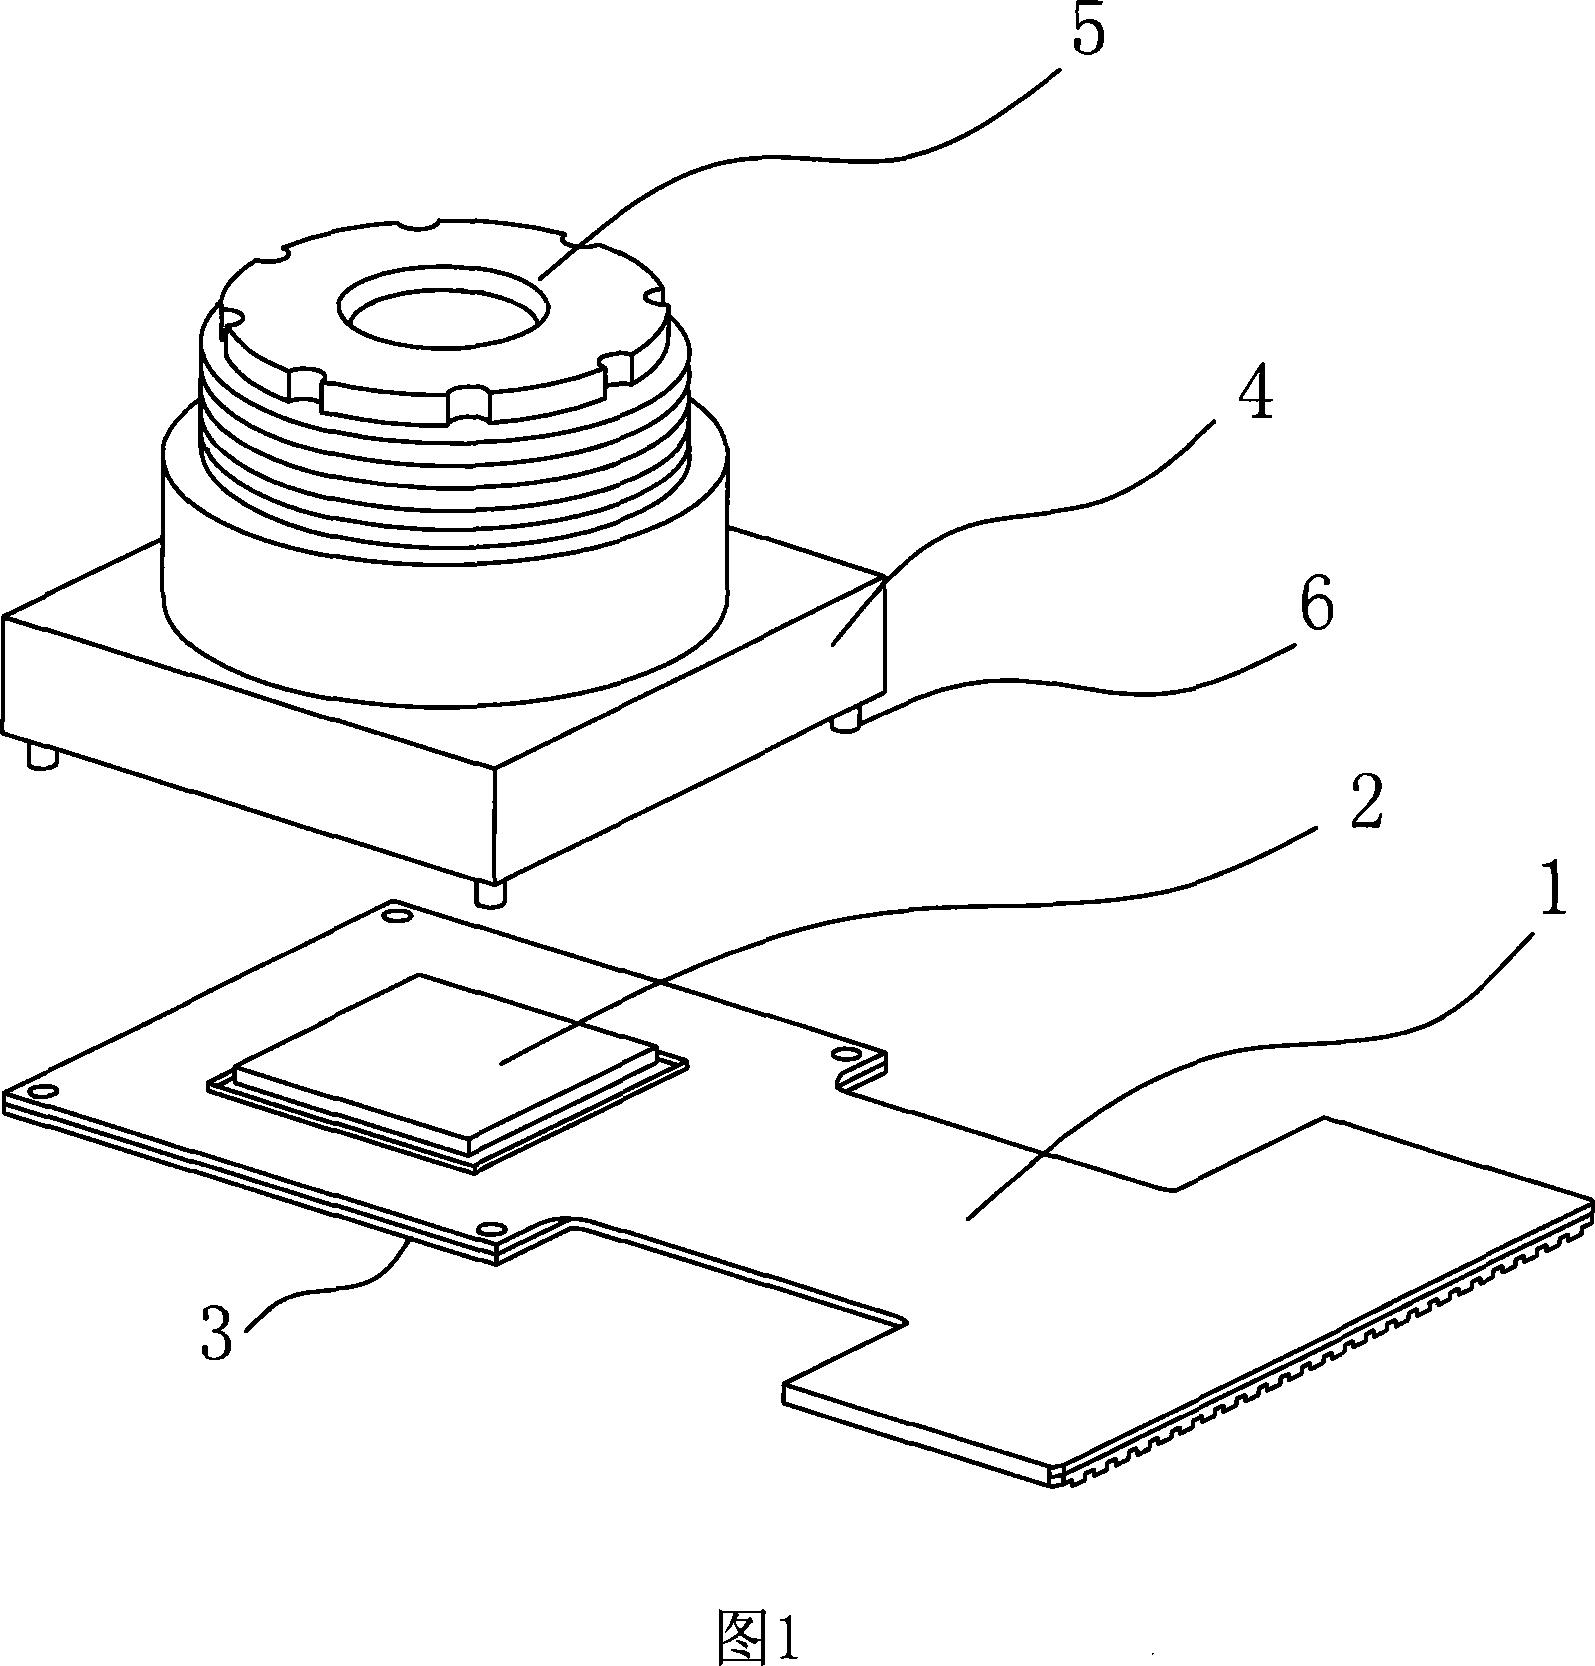 Making method for the image module with the sensor directly connected and encapsulated together with the soft board